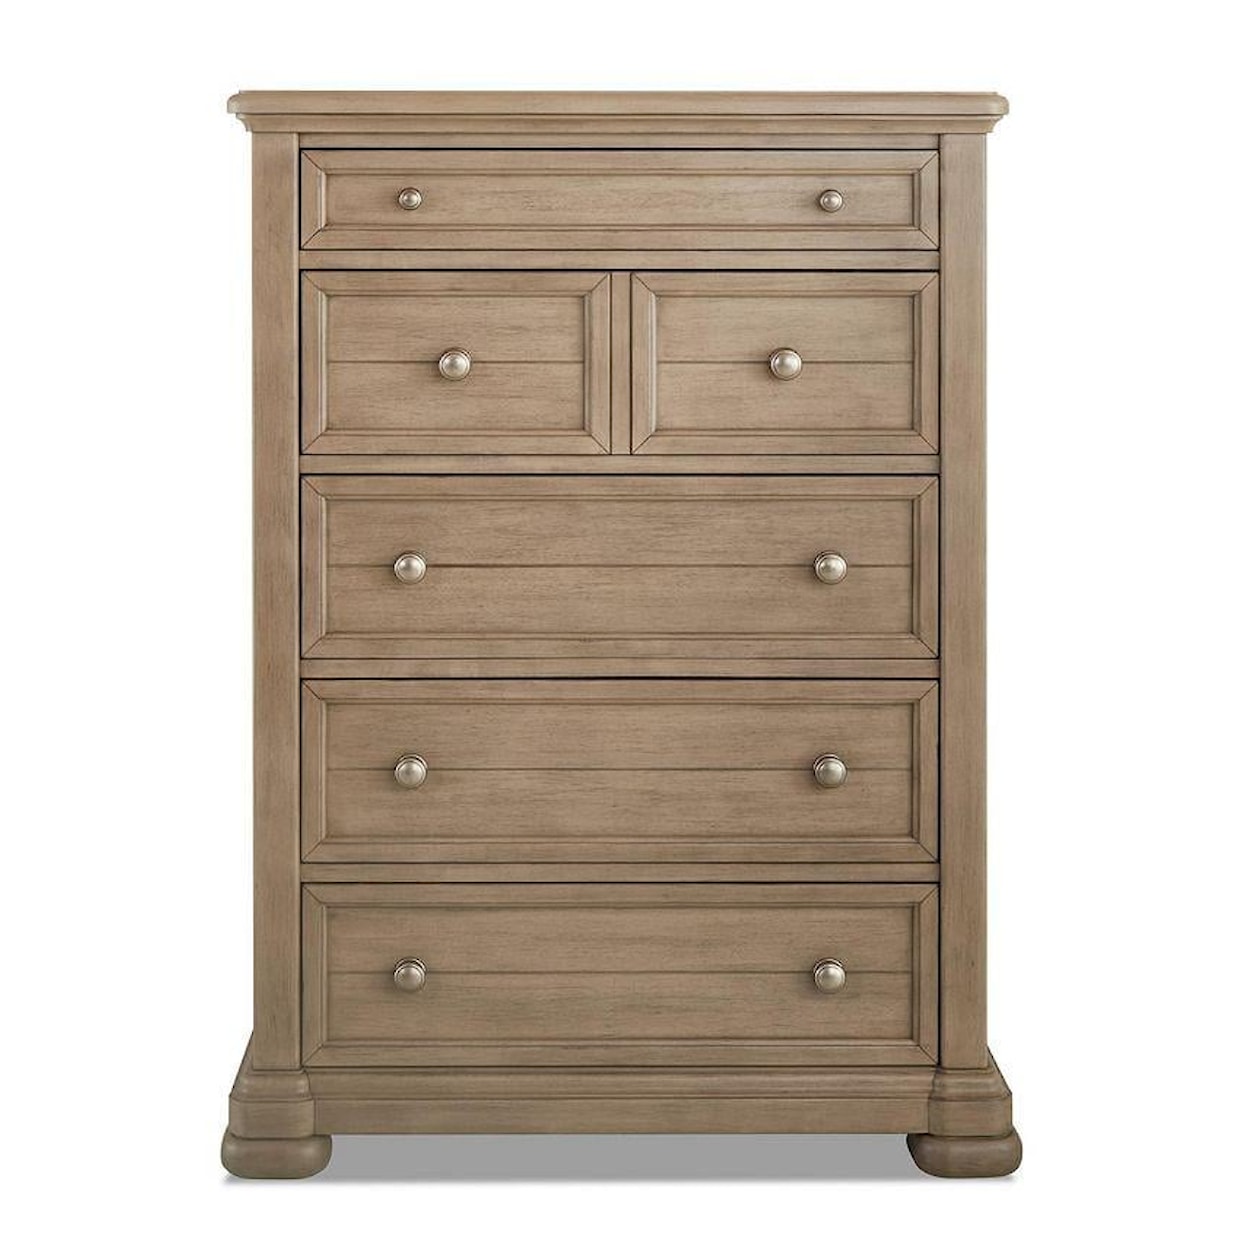 Trisha Yearwood Home Collection by Legacy Classic Nashville Drawer Chest